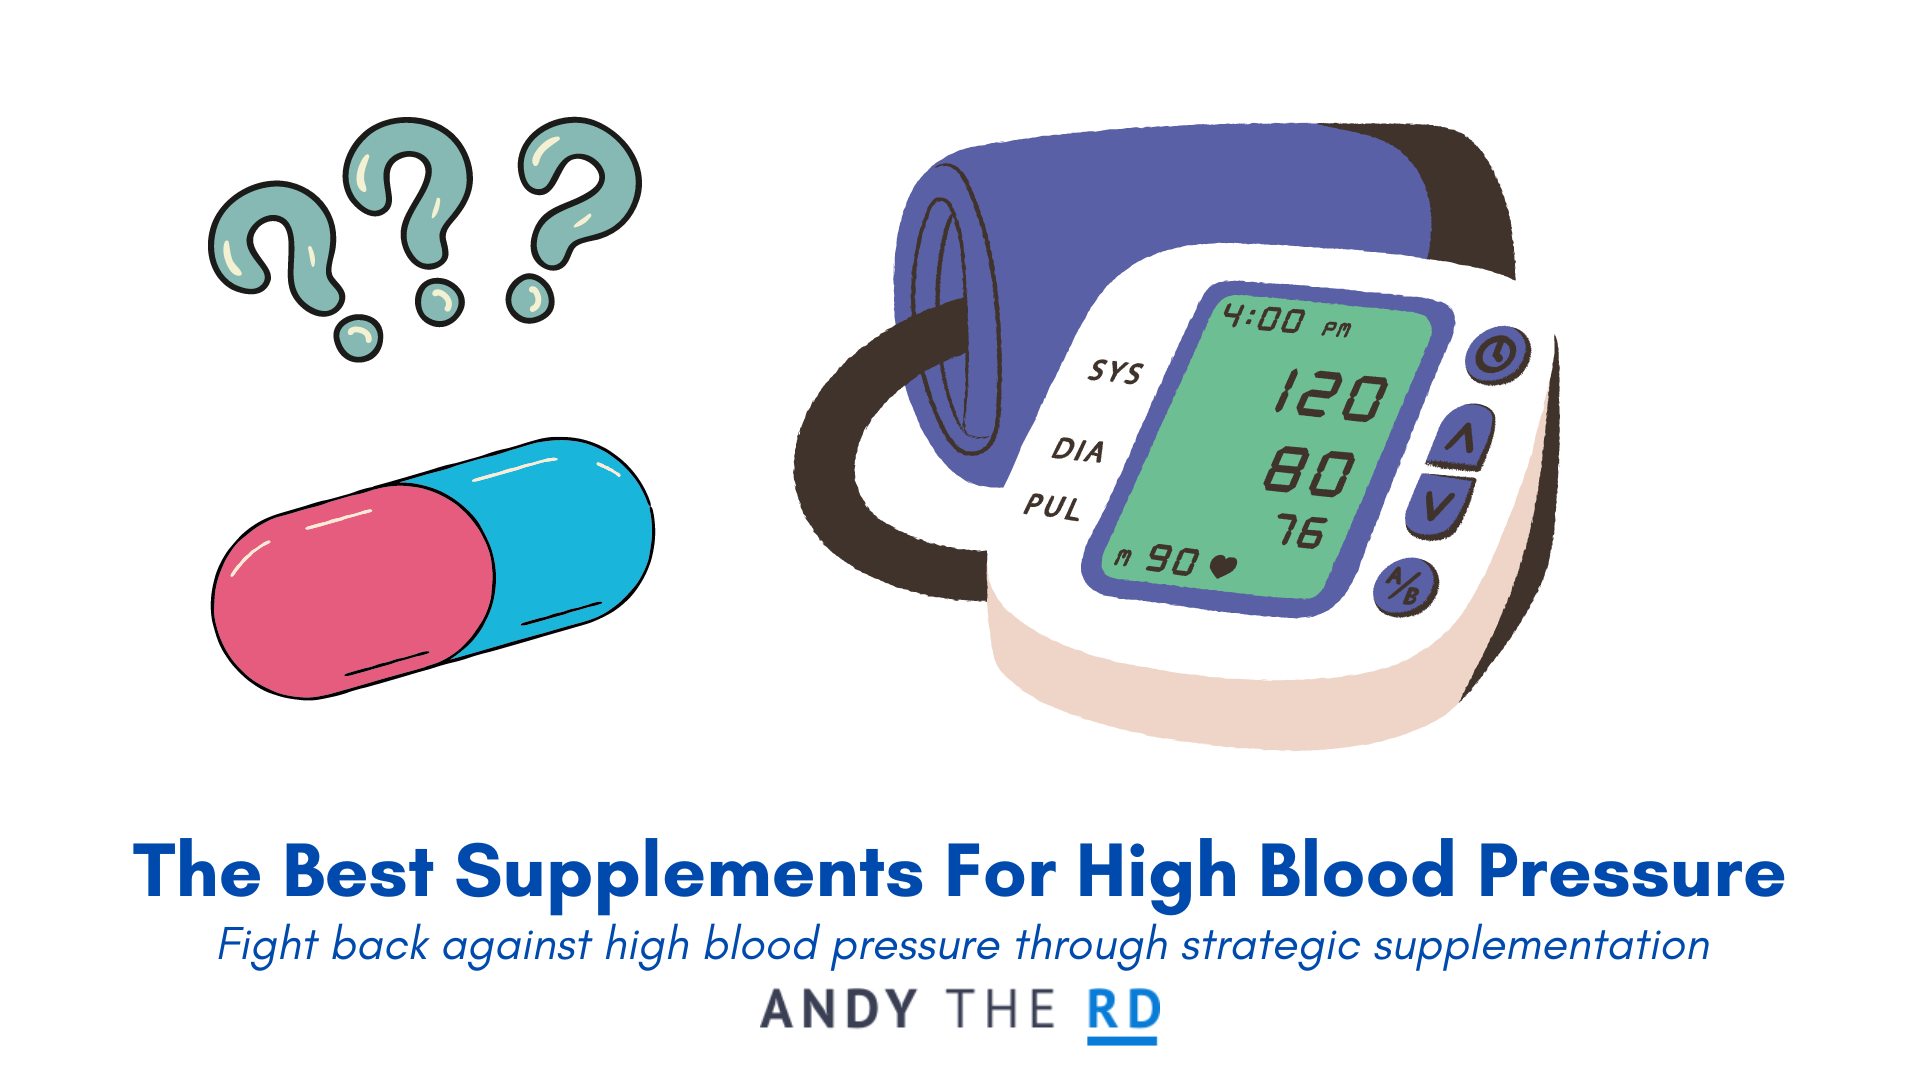 The Best Supplements For High Blood Pressure